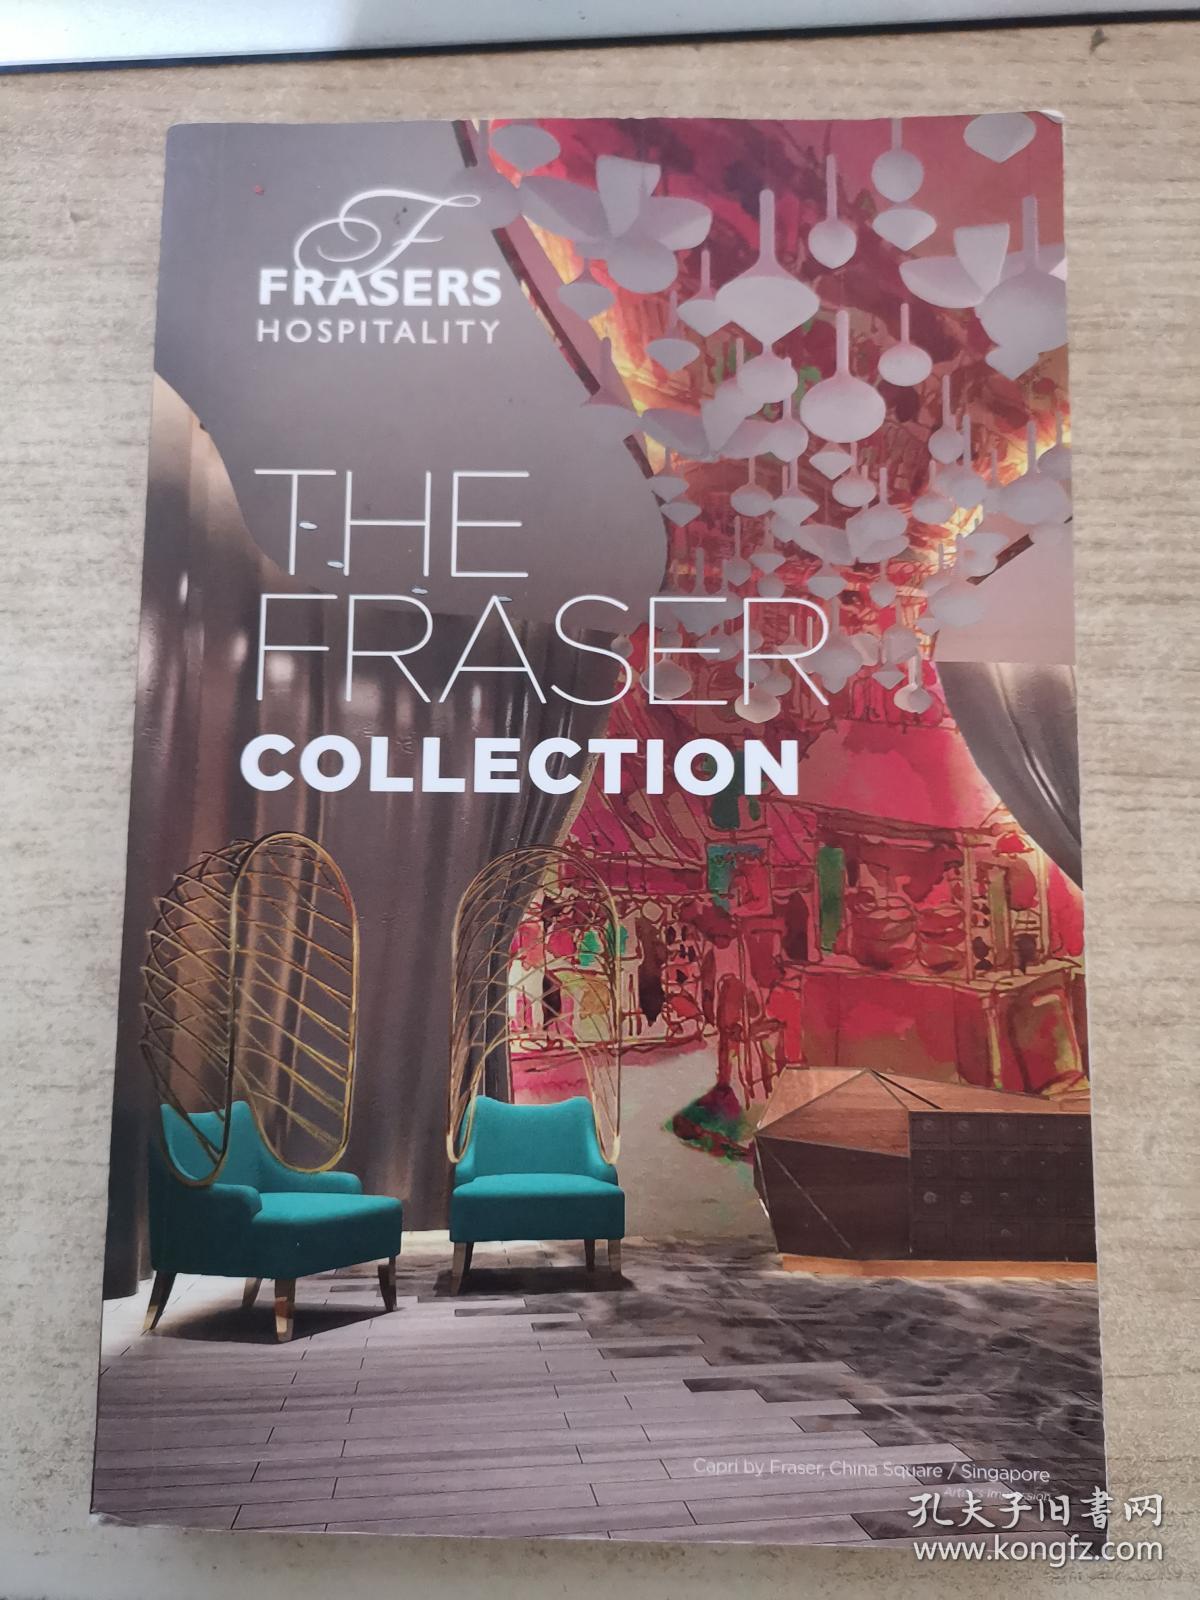 THEFRASEPCOLLECTION